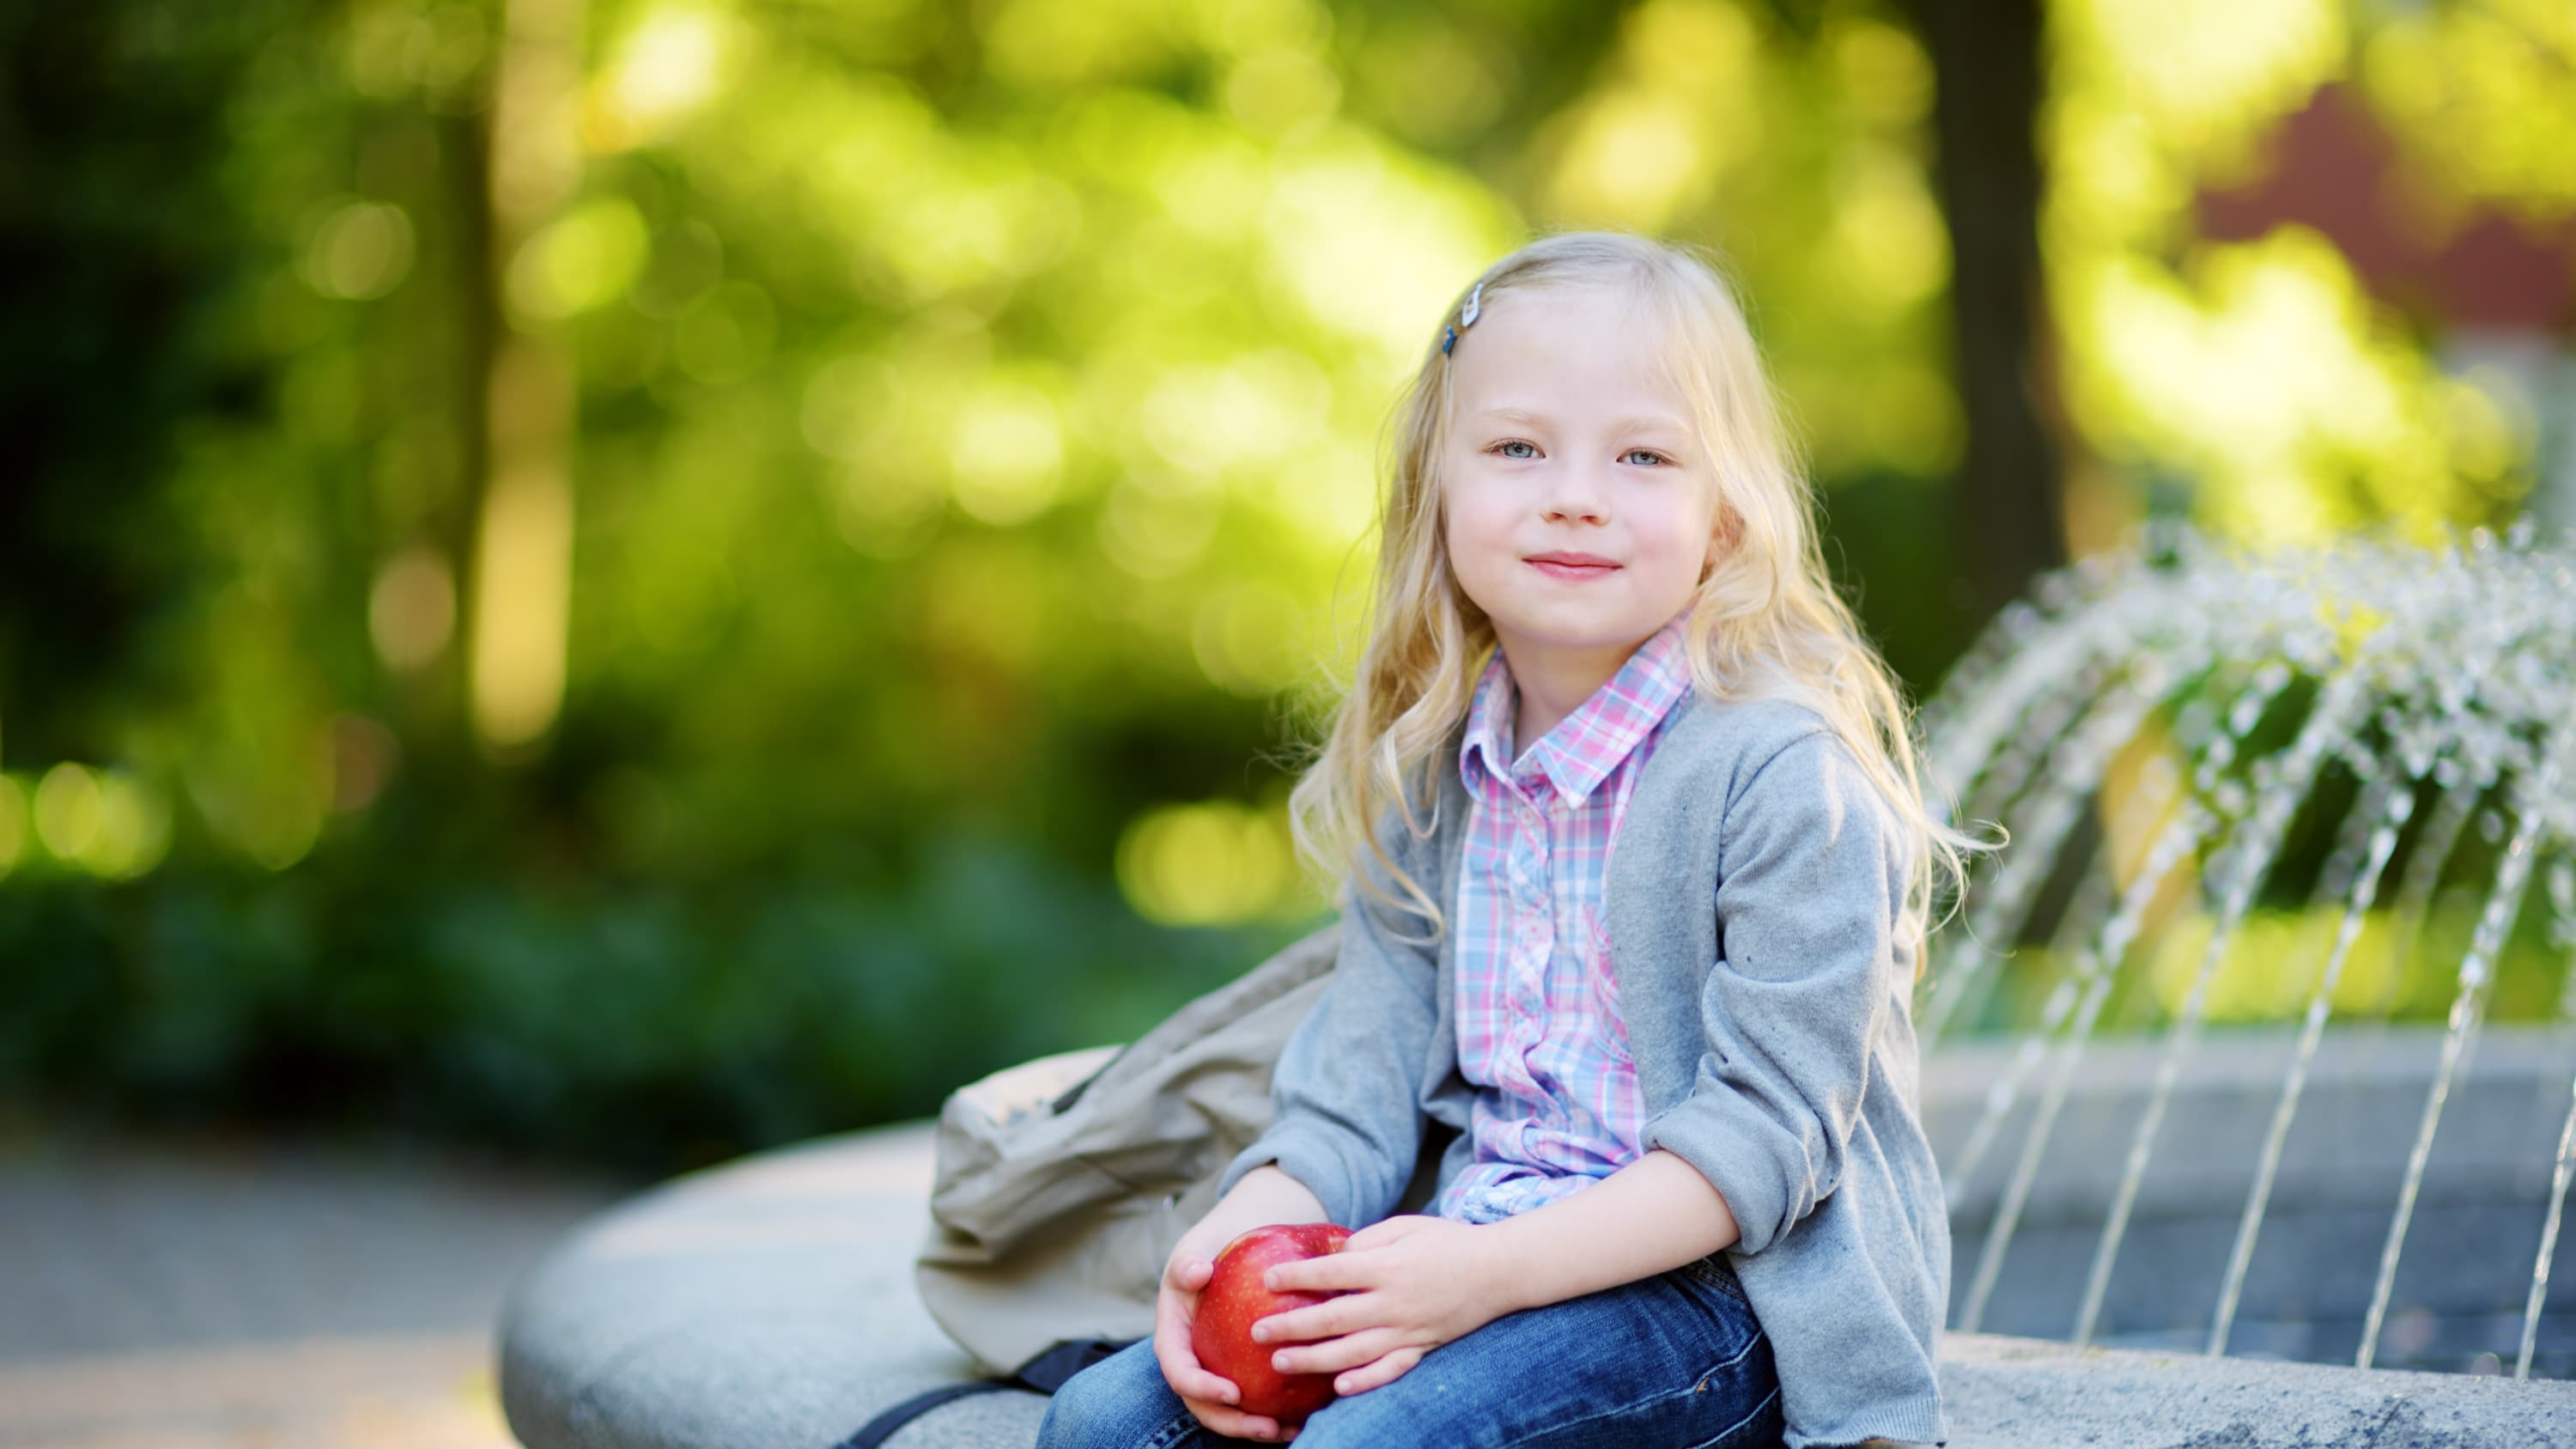 A girl, who could be a pediatric cancer survivor, is sitting on a the edge of a park fountain with an apple in her hand.